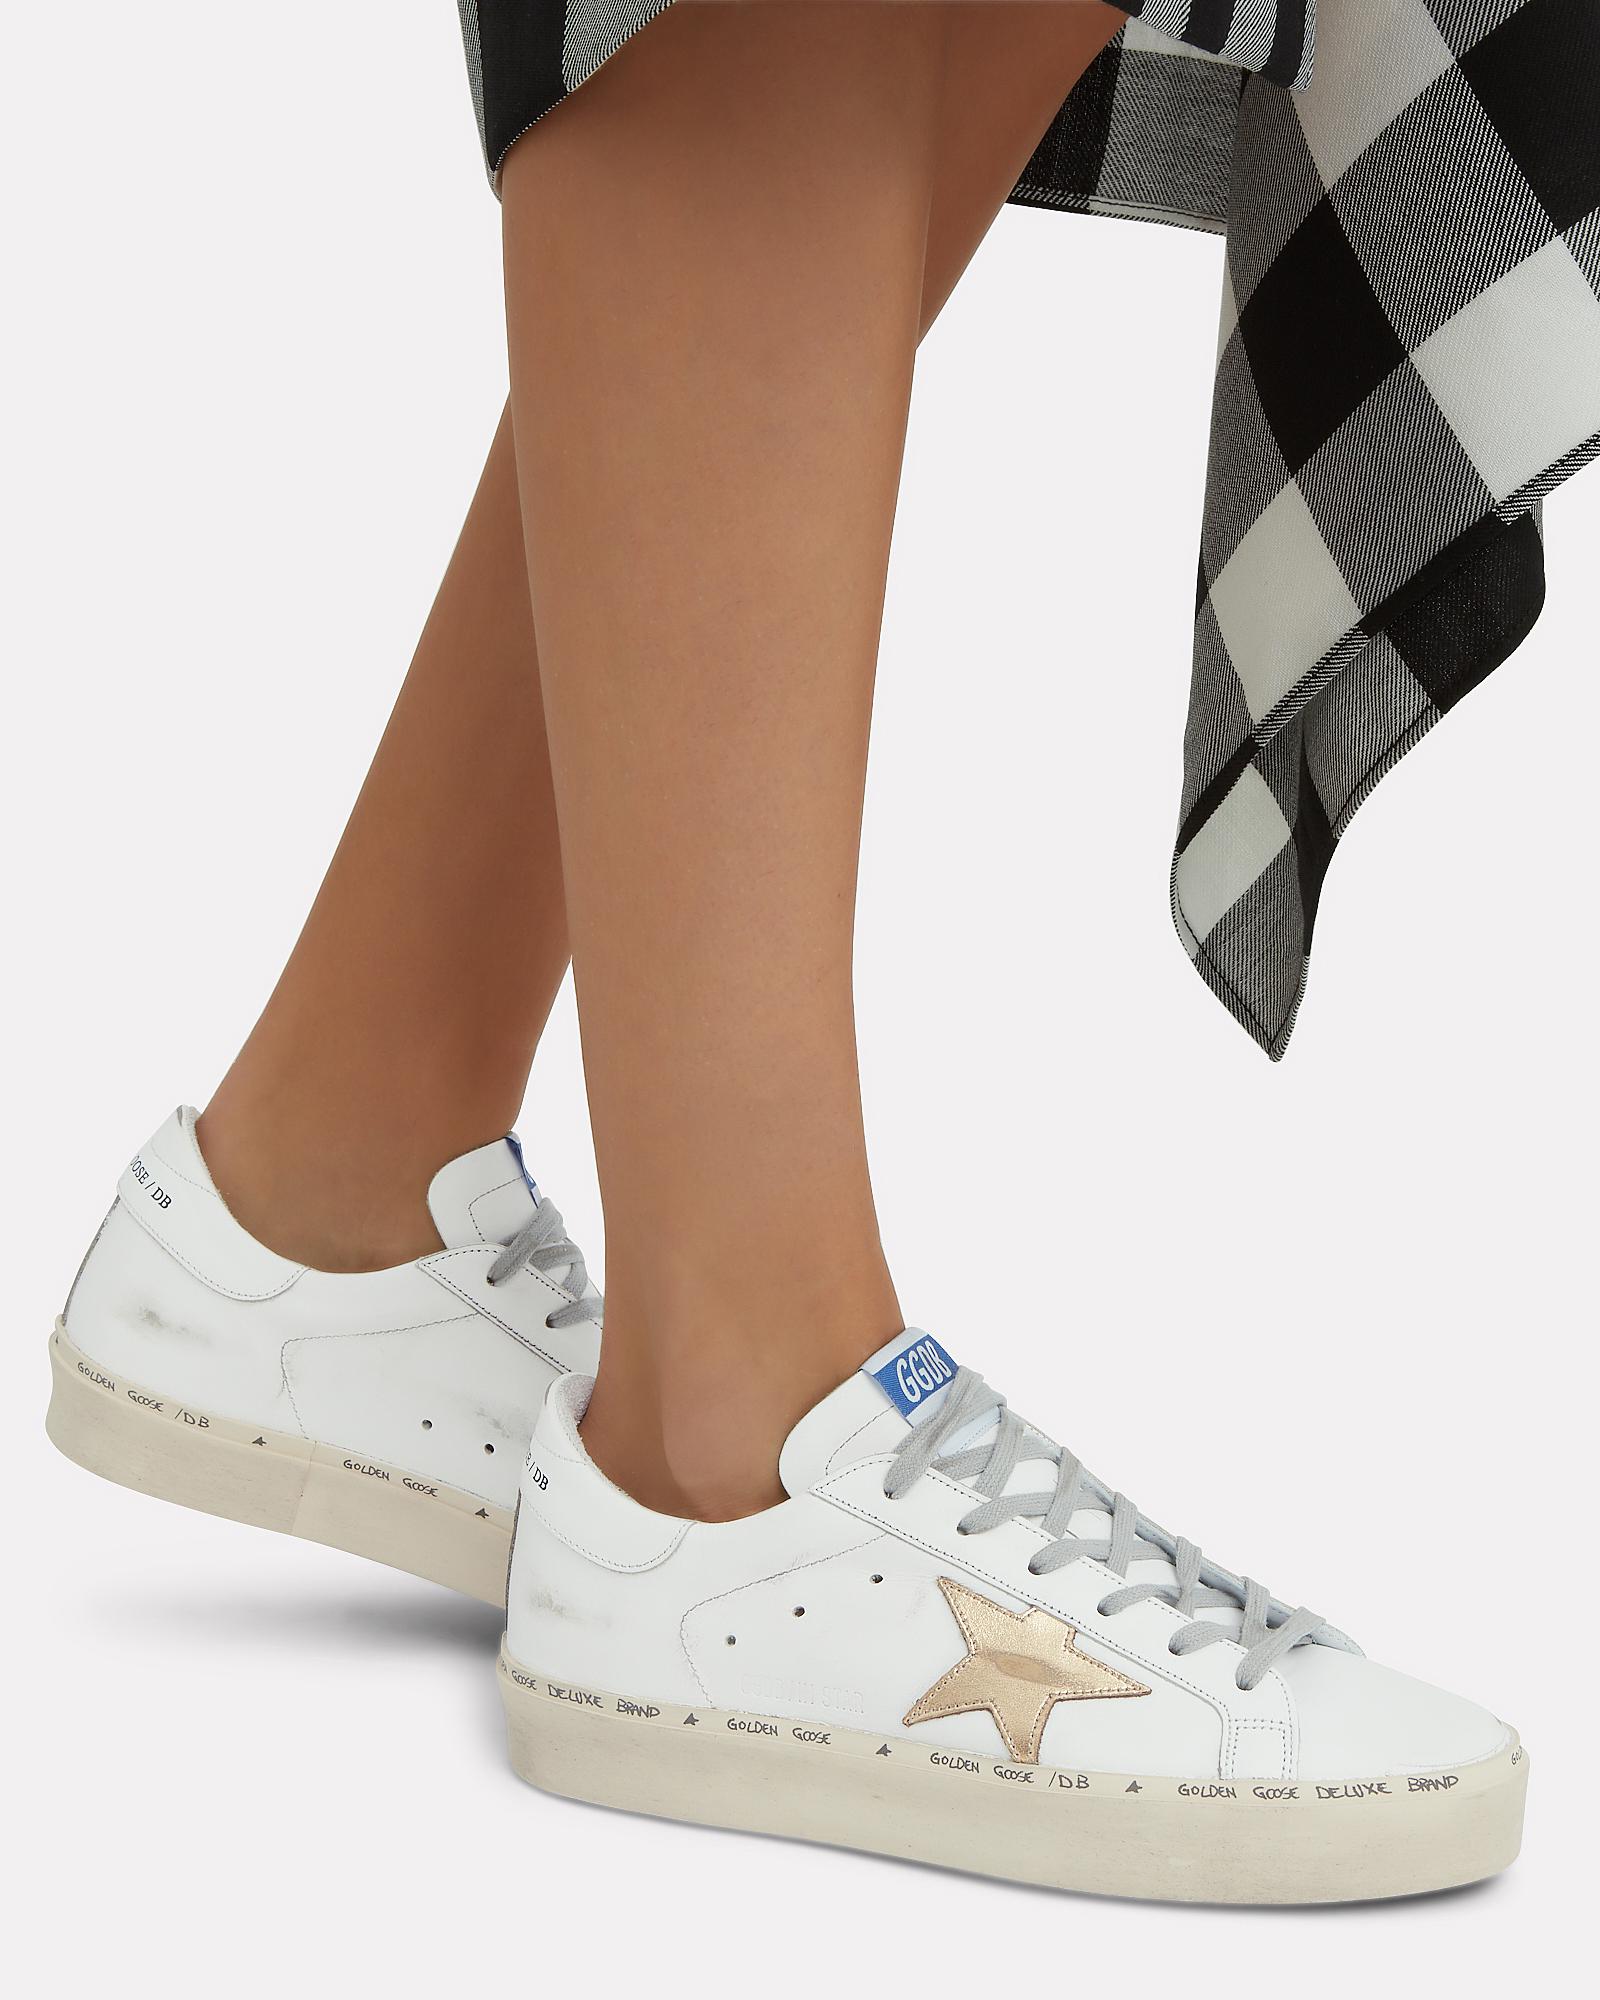 Golden Goose Hi Star Gold Leather Low-top Sneakers in White - Lyst